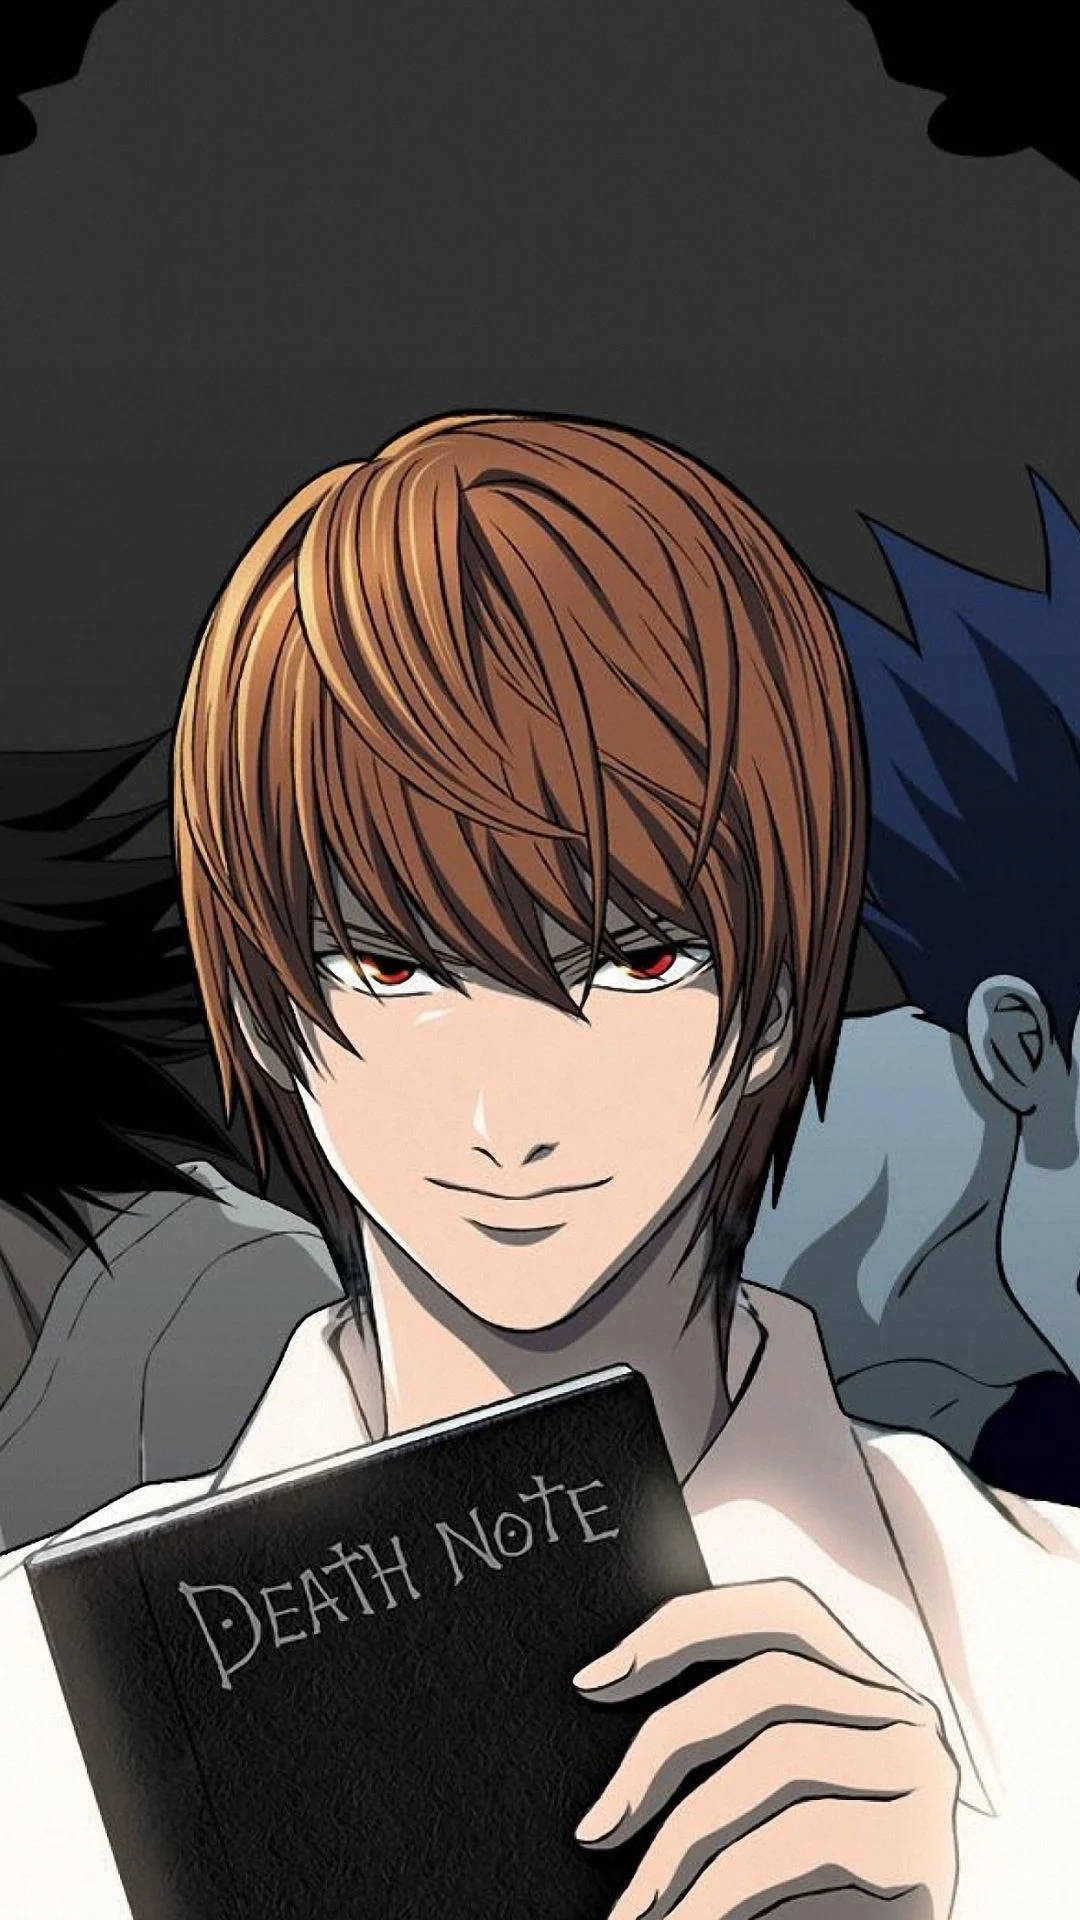 Light Holding The Iconic Death Note Iphone Background